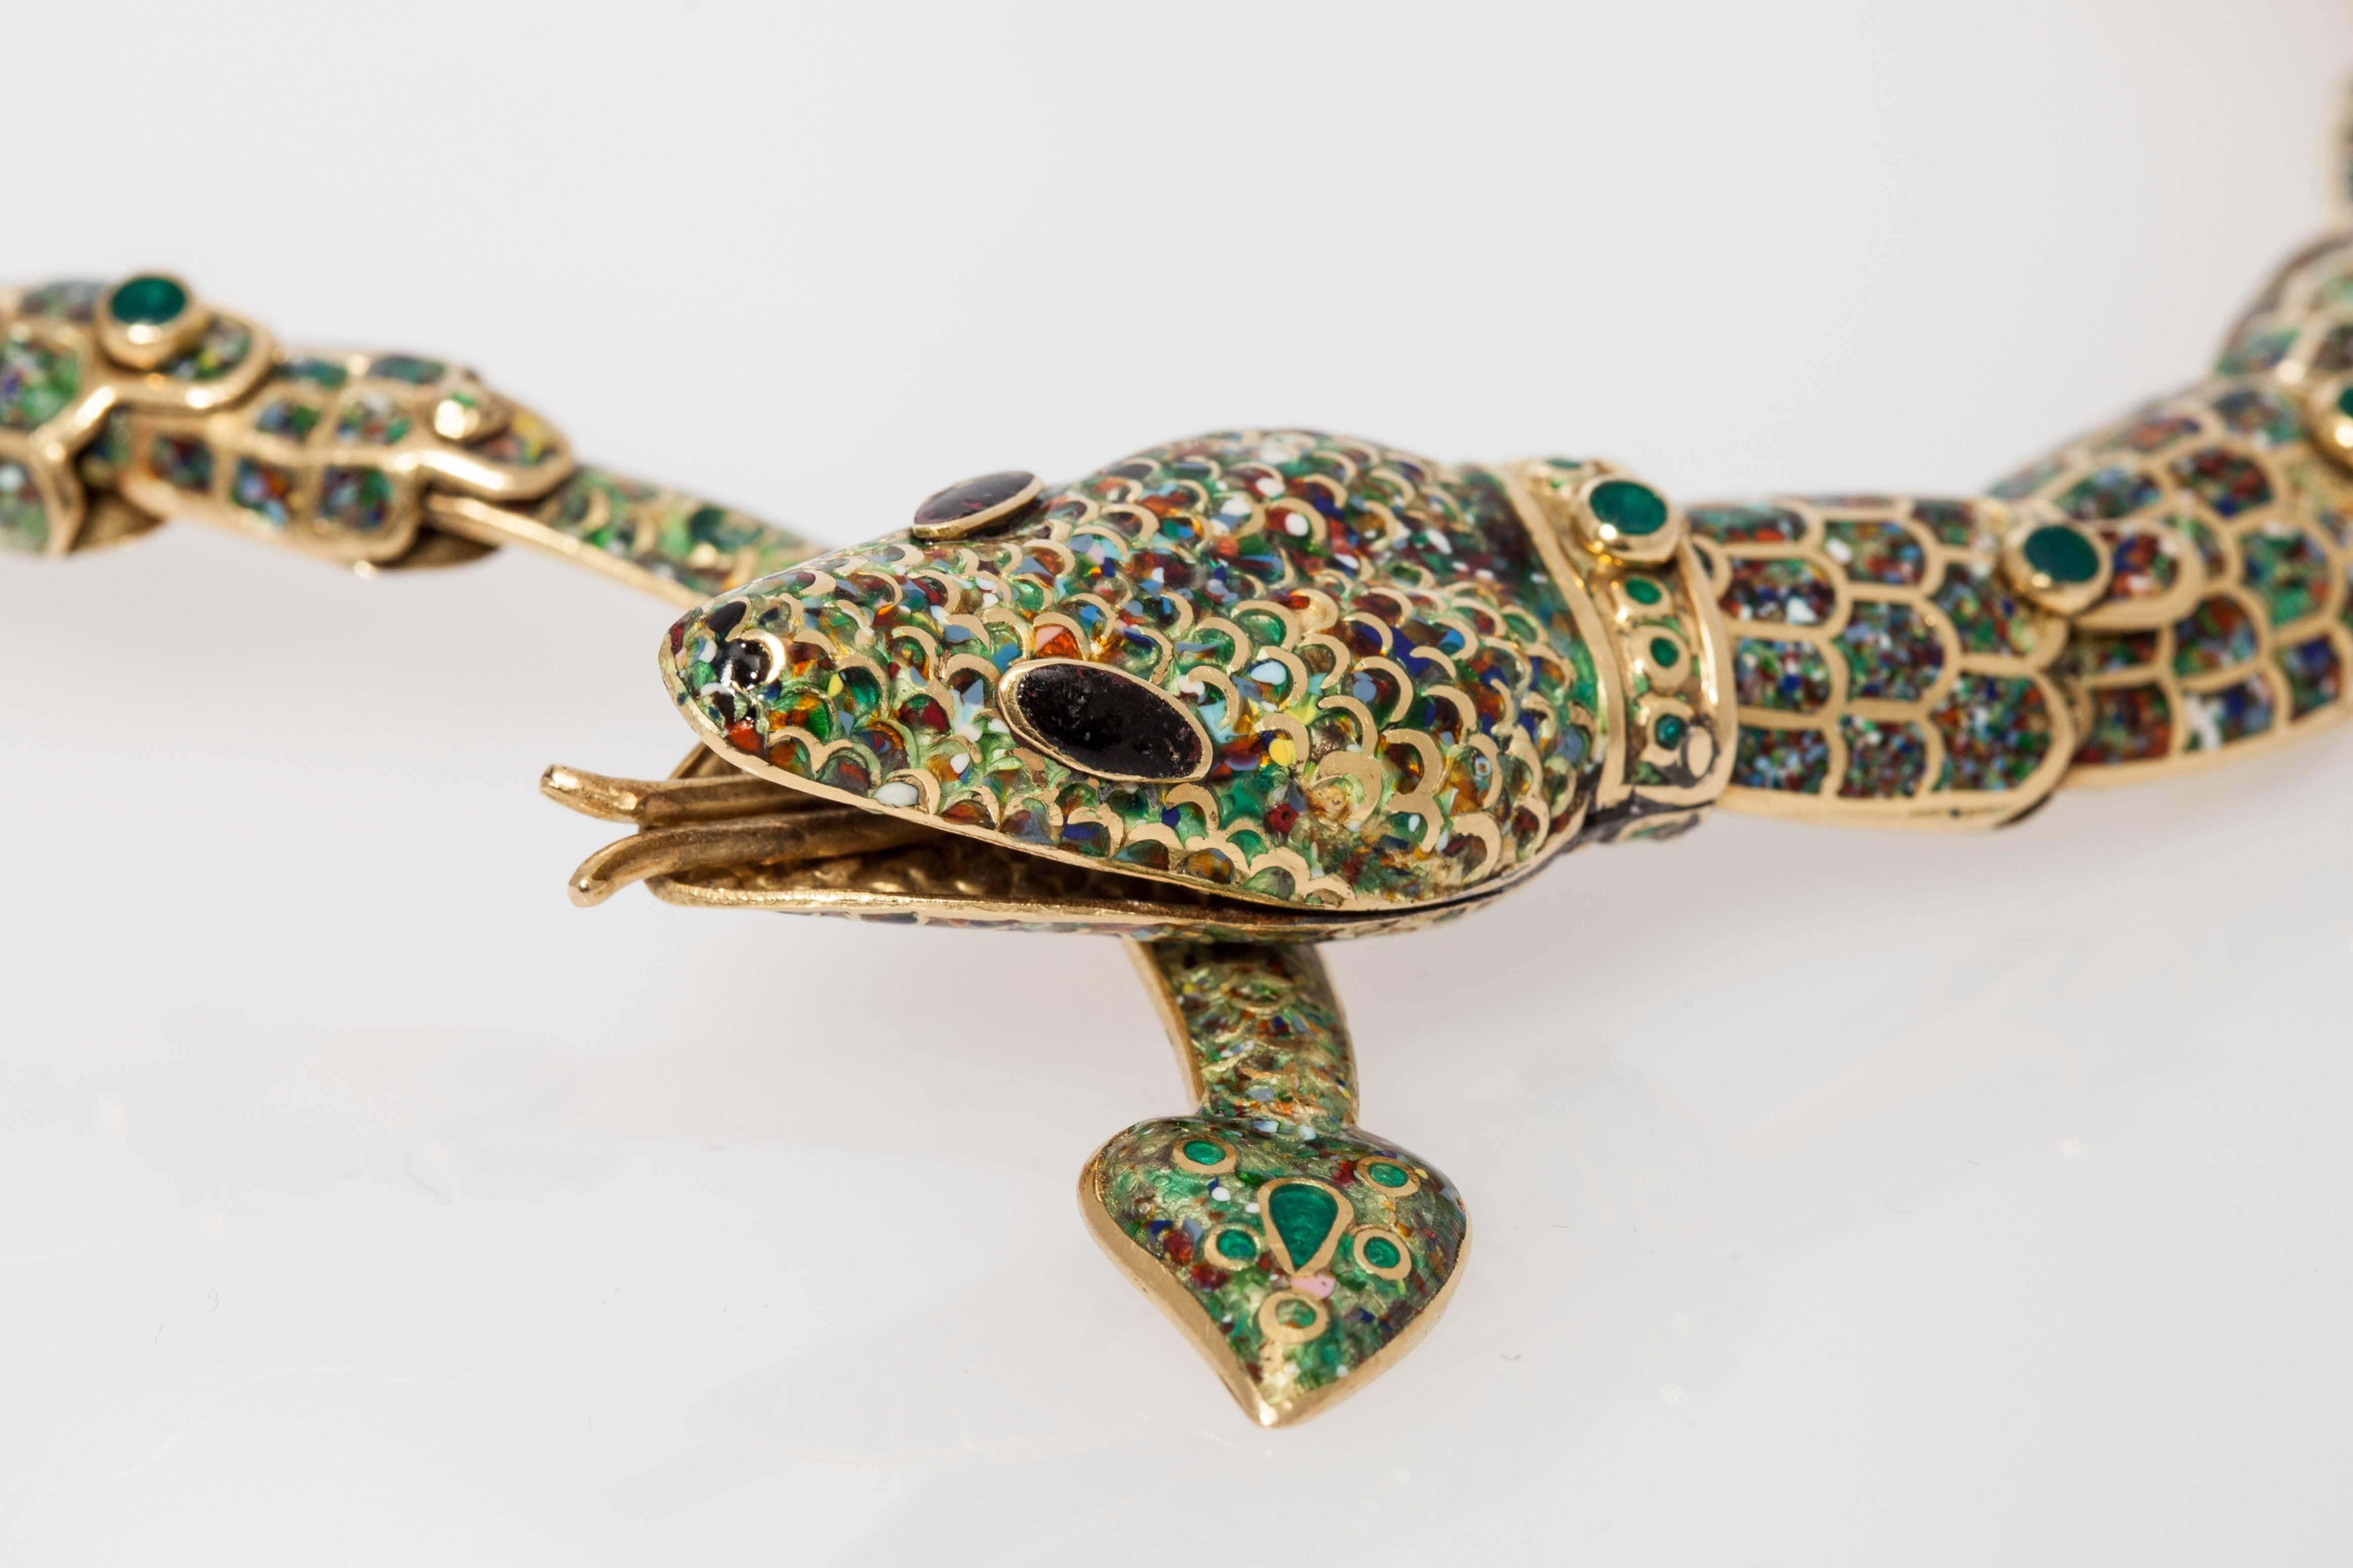 A peculiar snake set comprising a bracelet and a necklace, in 18kt yellow gold and fine enameling. Made in Taxco, Mexico, circa 1950. 